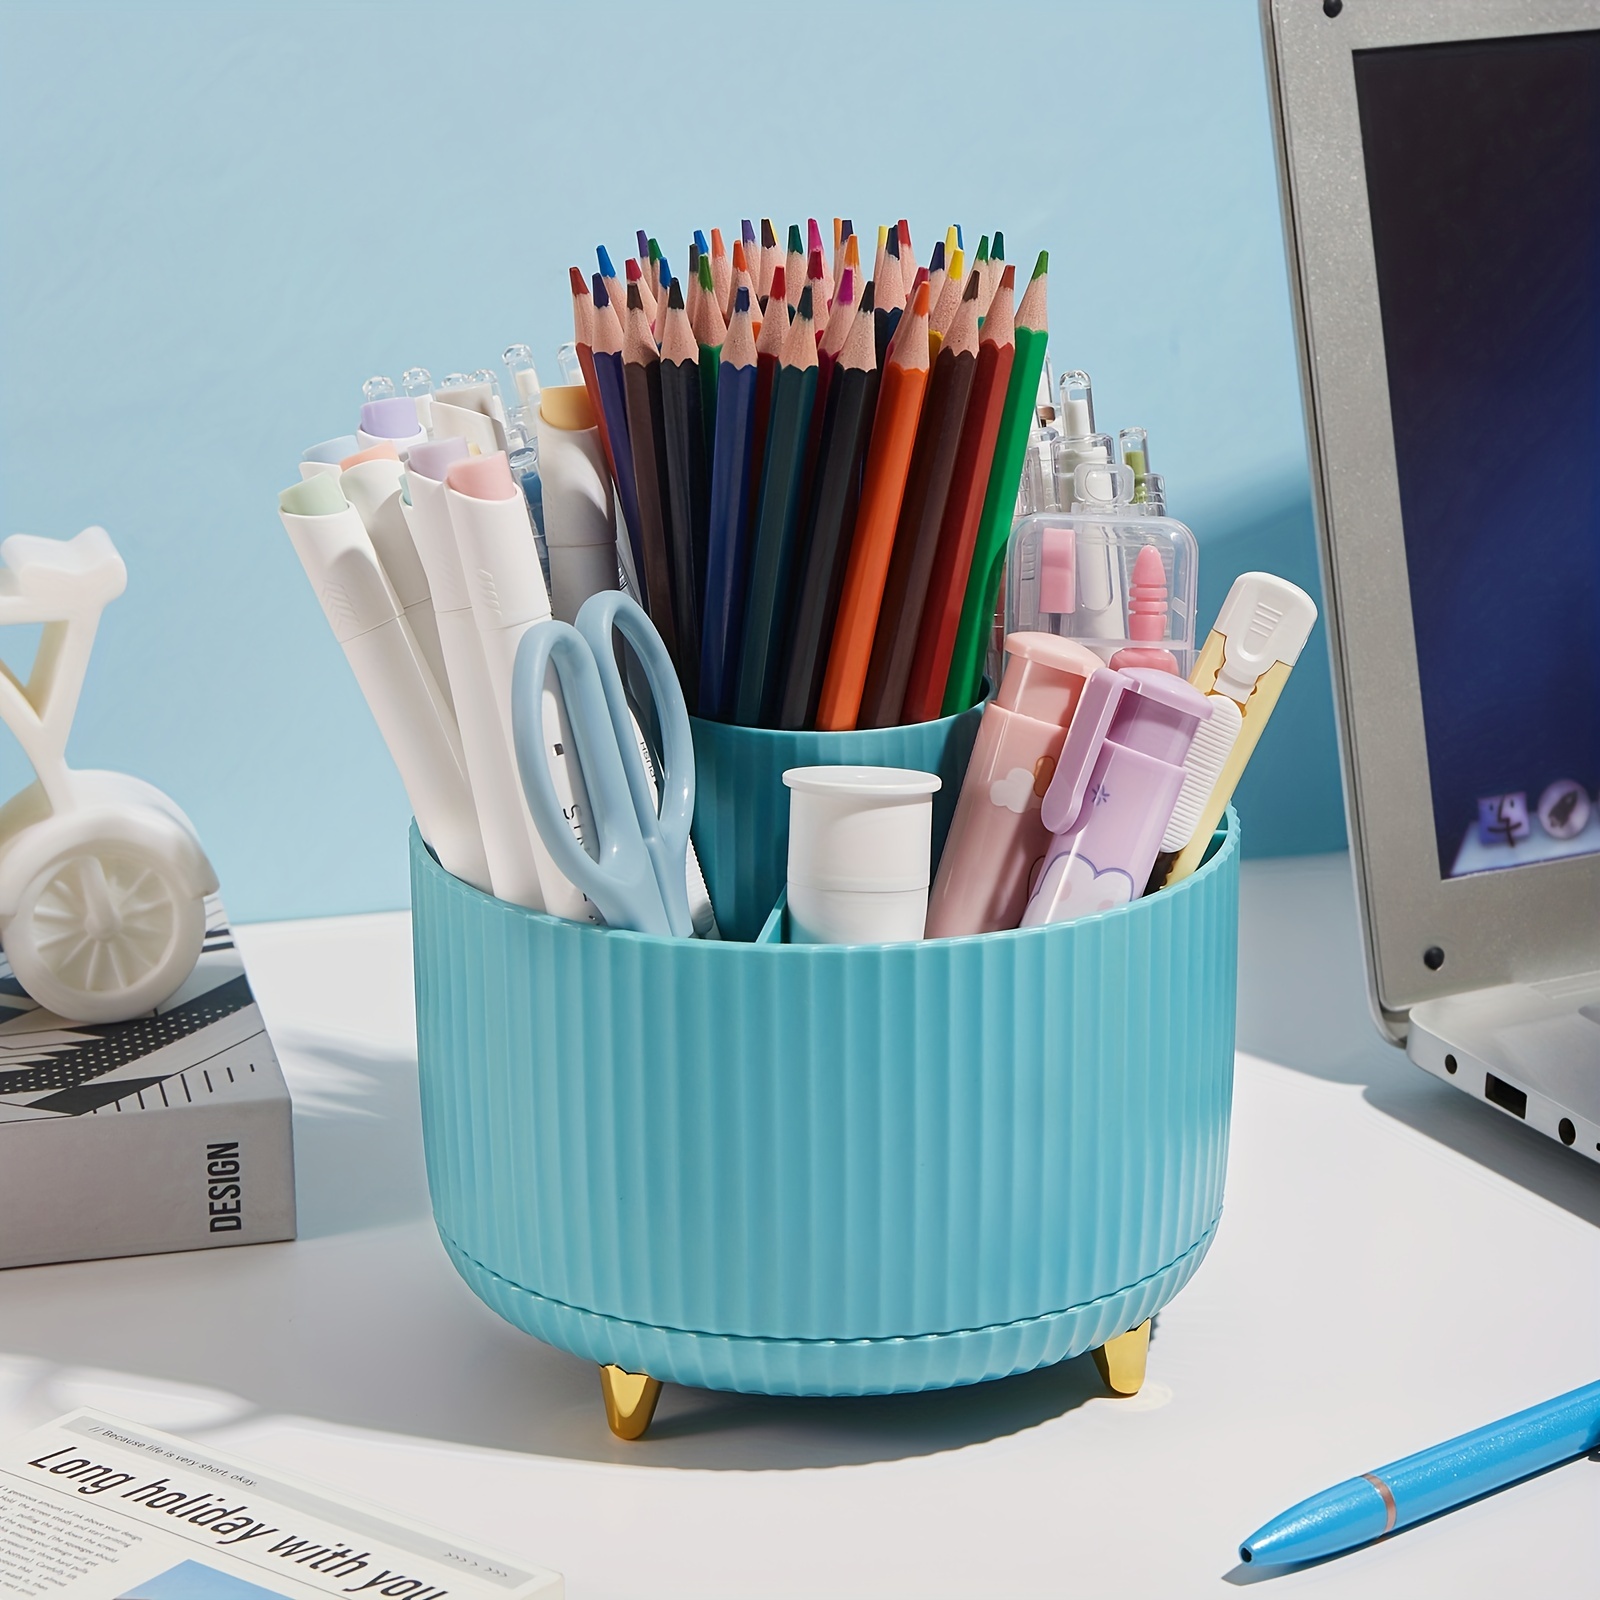 Green Three-cup Pen Holder, Transparent Color, Large Capacity, Creative Pen  Holder, Paper Clip Storage Box, Multifunctional, Simple Office Supplies For  Desk